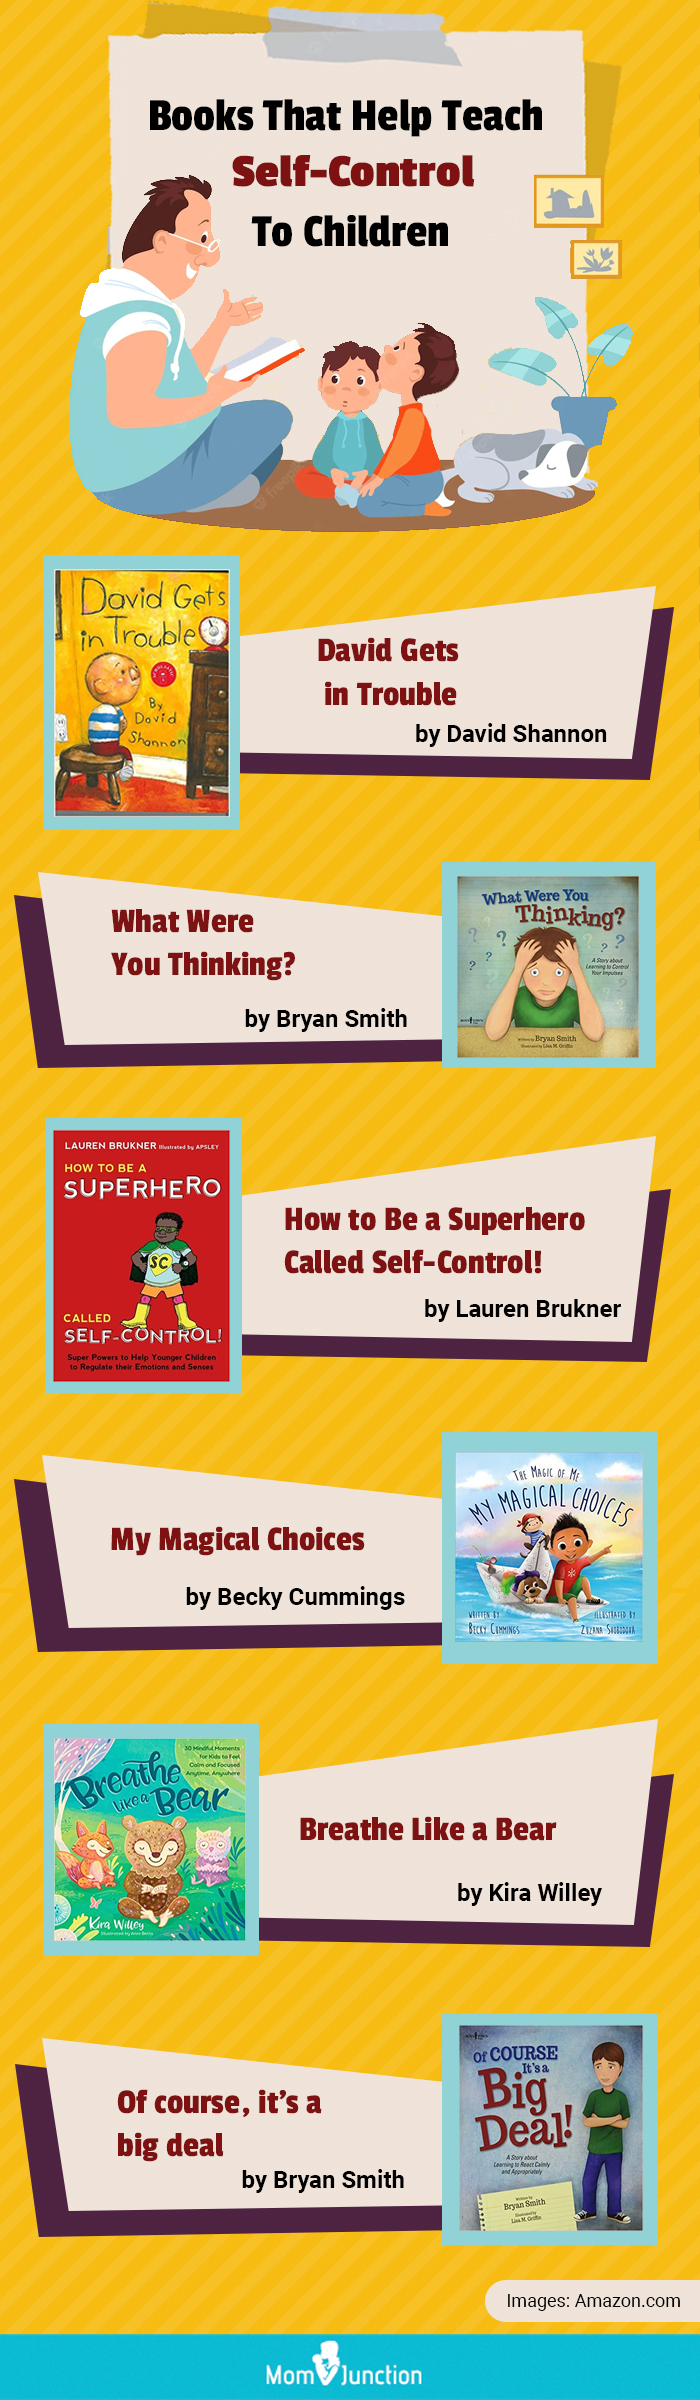 books that help teach self control to children (infographic)